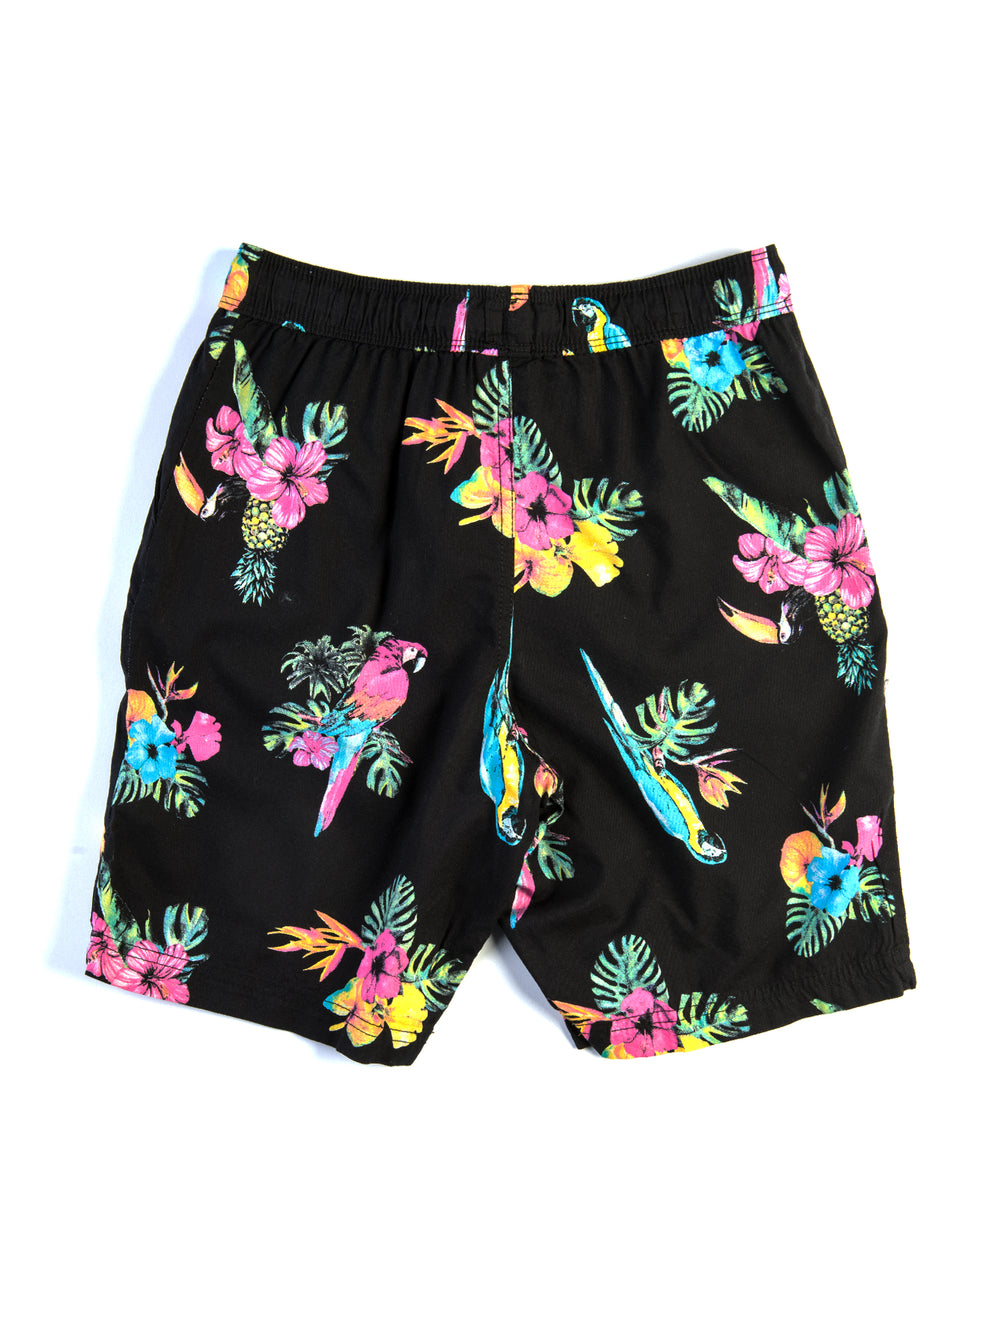 KIDS HURLEY PRINTED SHORT - CLEARANCE